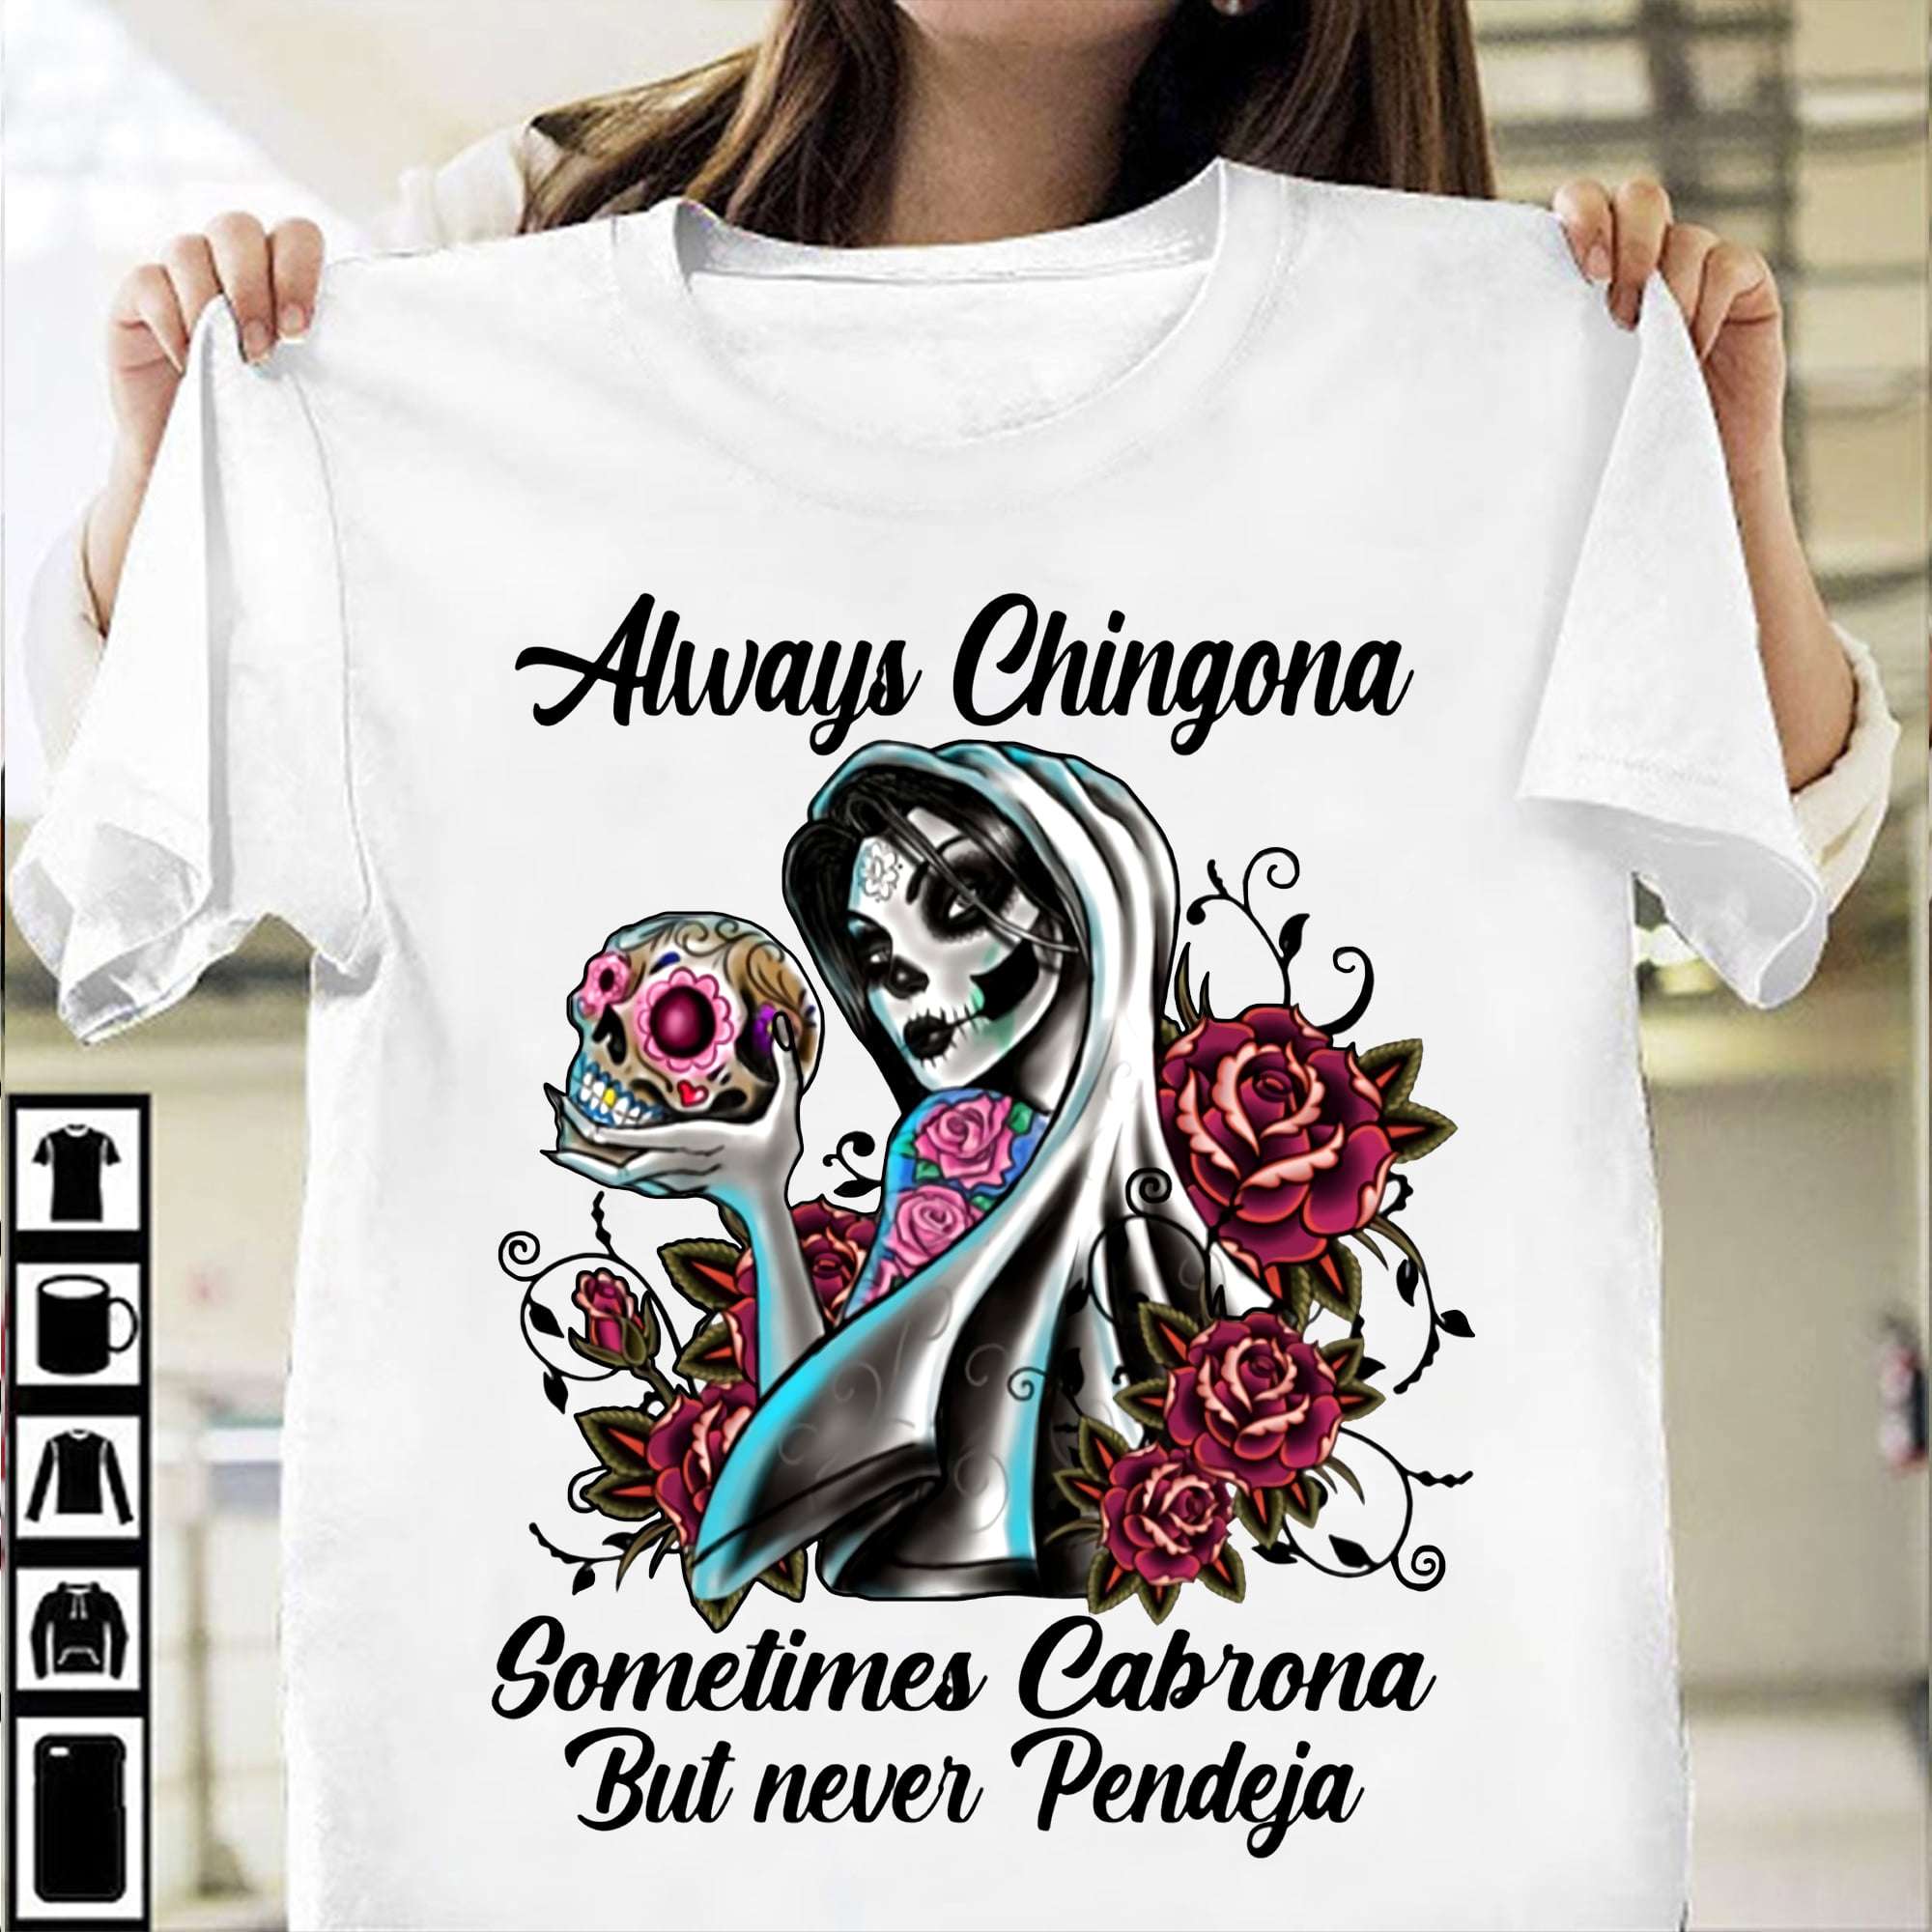 Always Chingona sometime Cabrona but never Pendeja - Mexican woman, halloween skull T-shirt